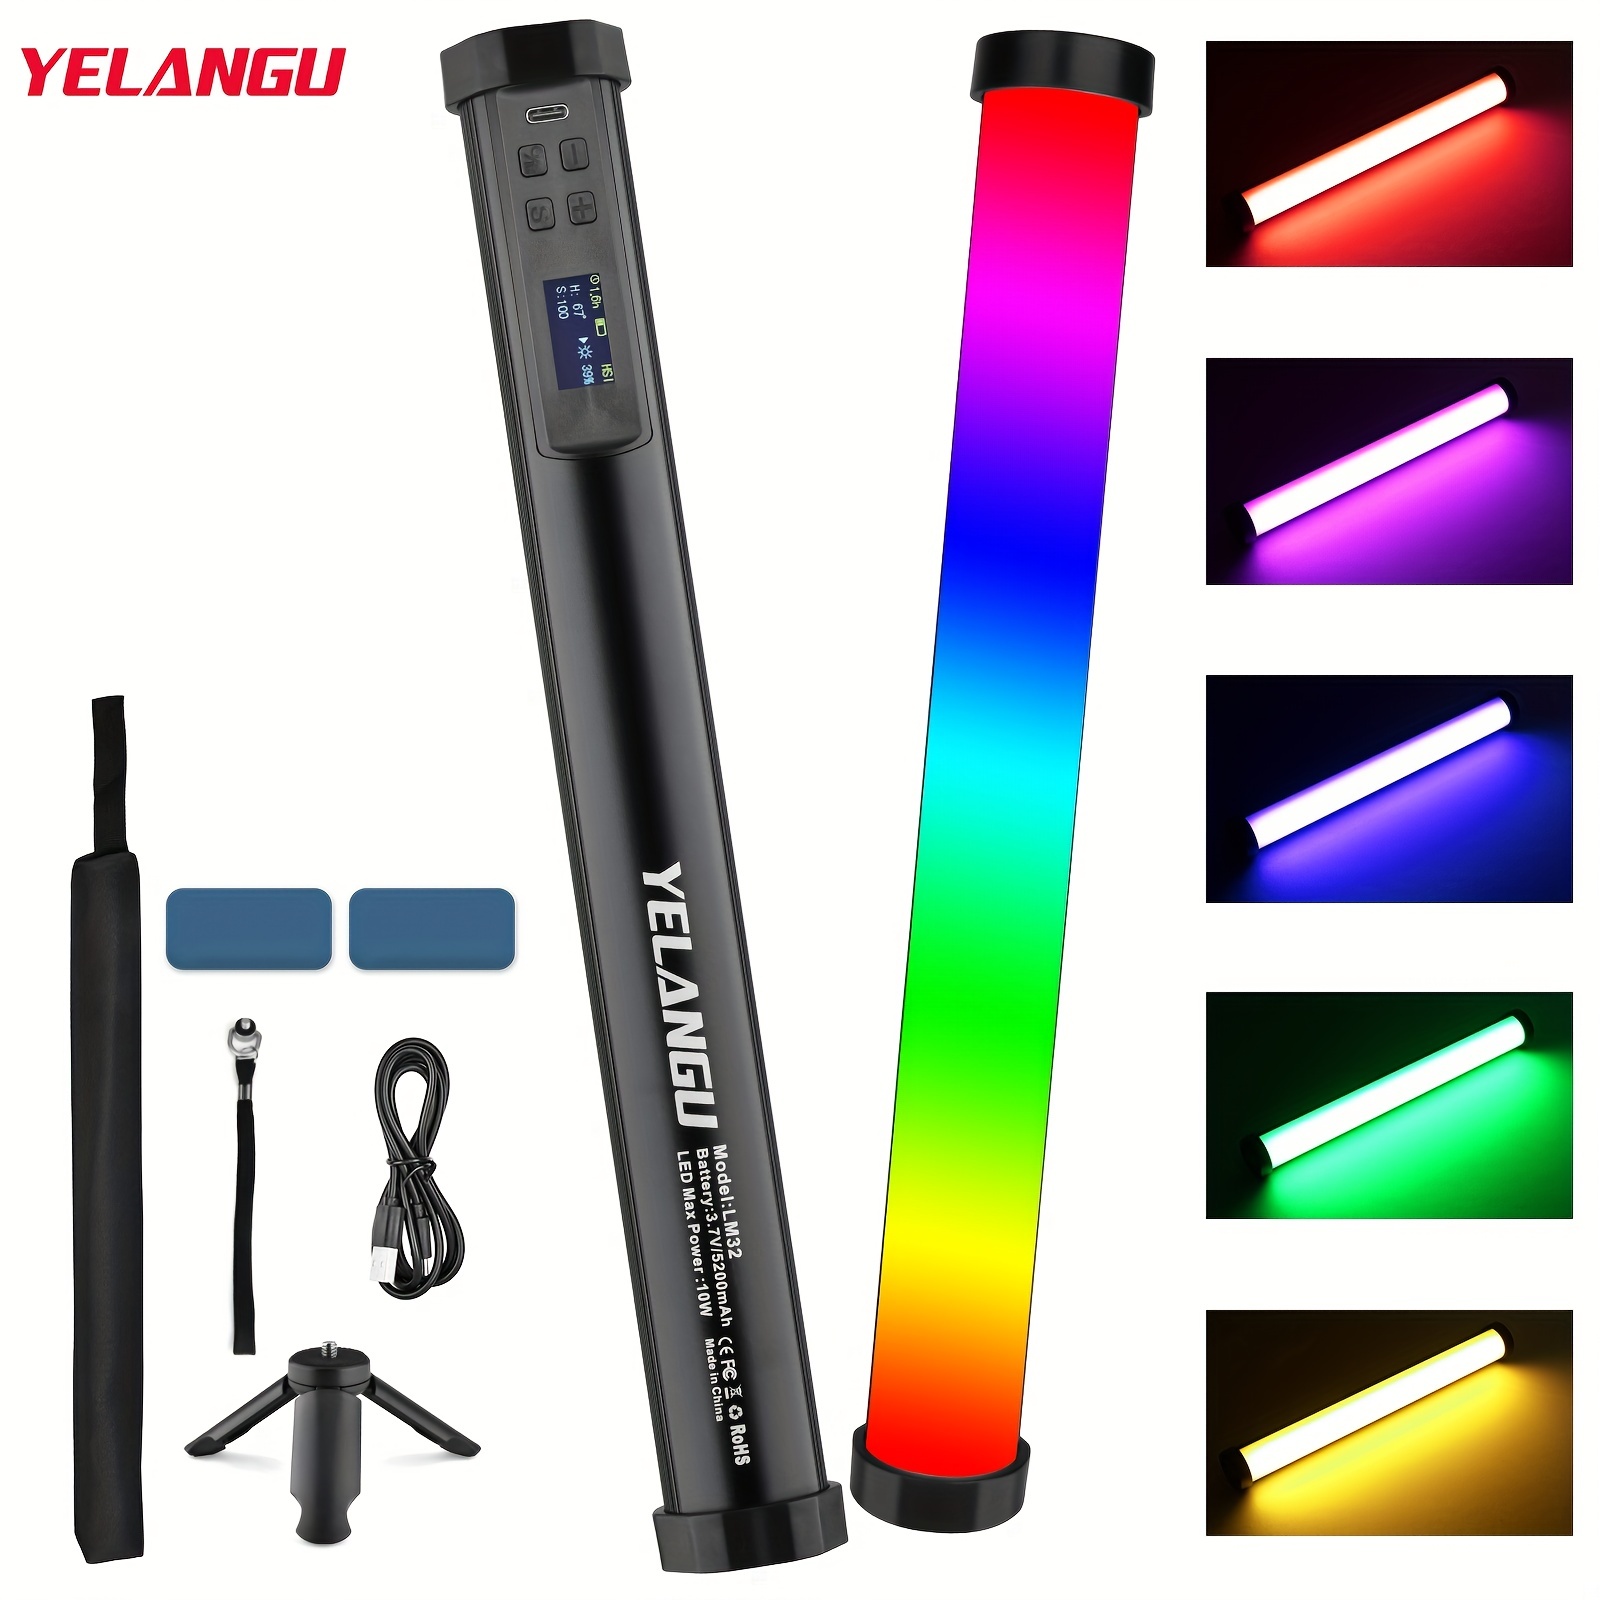 Photographic LED stick light lamp rod handheld light portable outdoor  shooting lamp RGB ice stick lamp 12 special effects